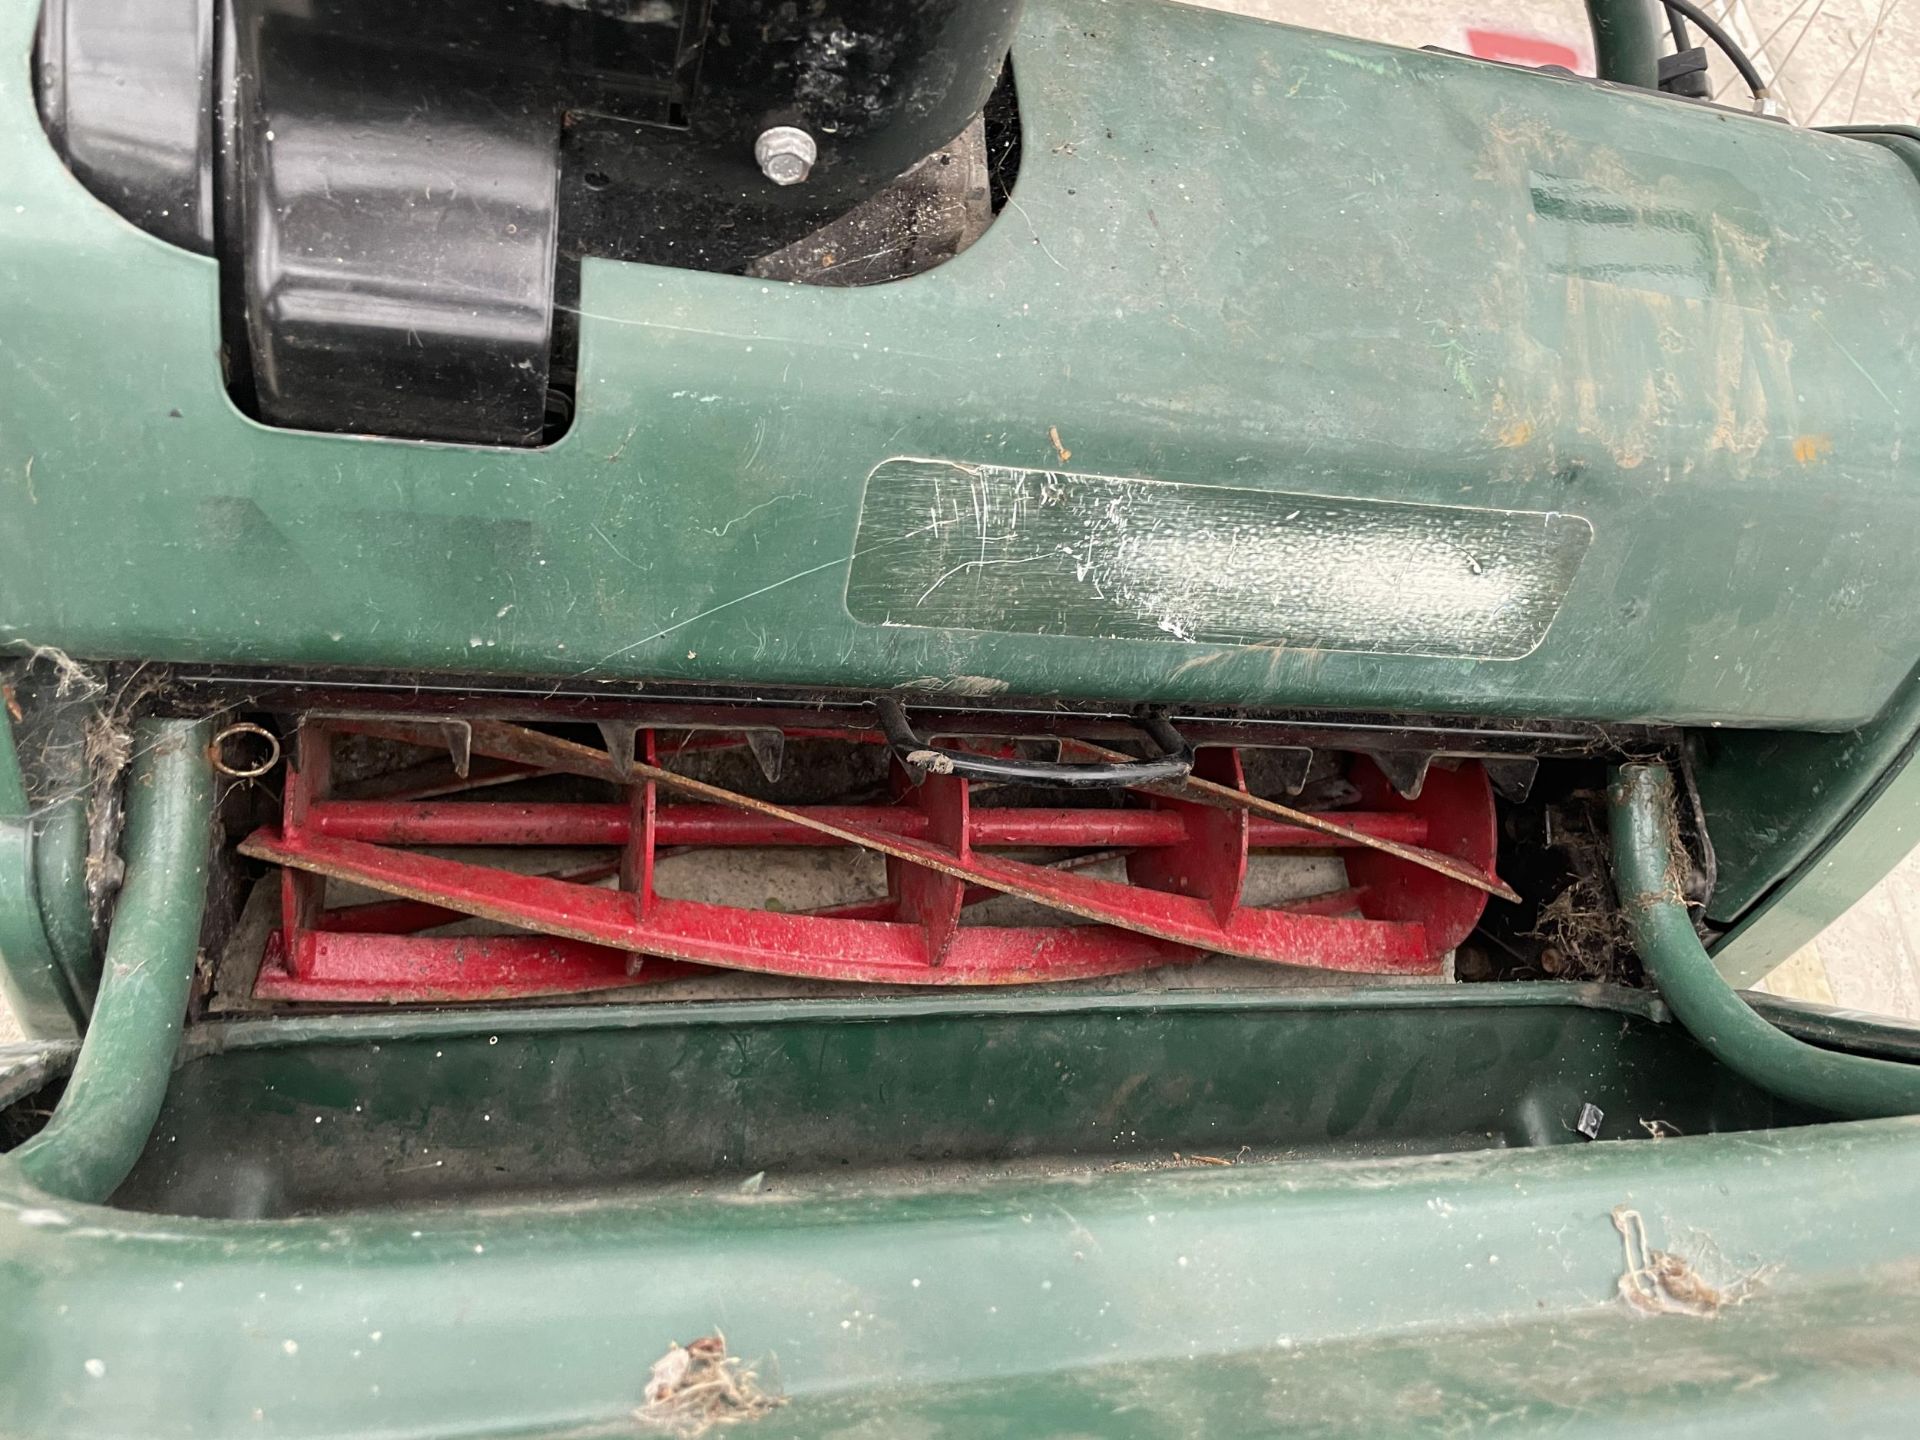 AN ATCO CYLINDER MOWER WITH GRASS BOX BELIEVED IN WORKING ORDER BUT NO WARRANTY - Image 3 of 4